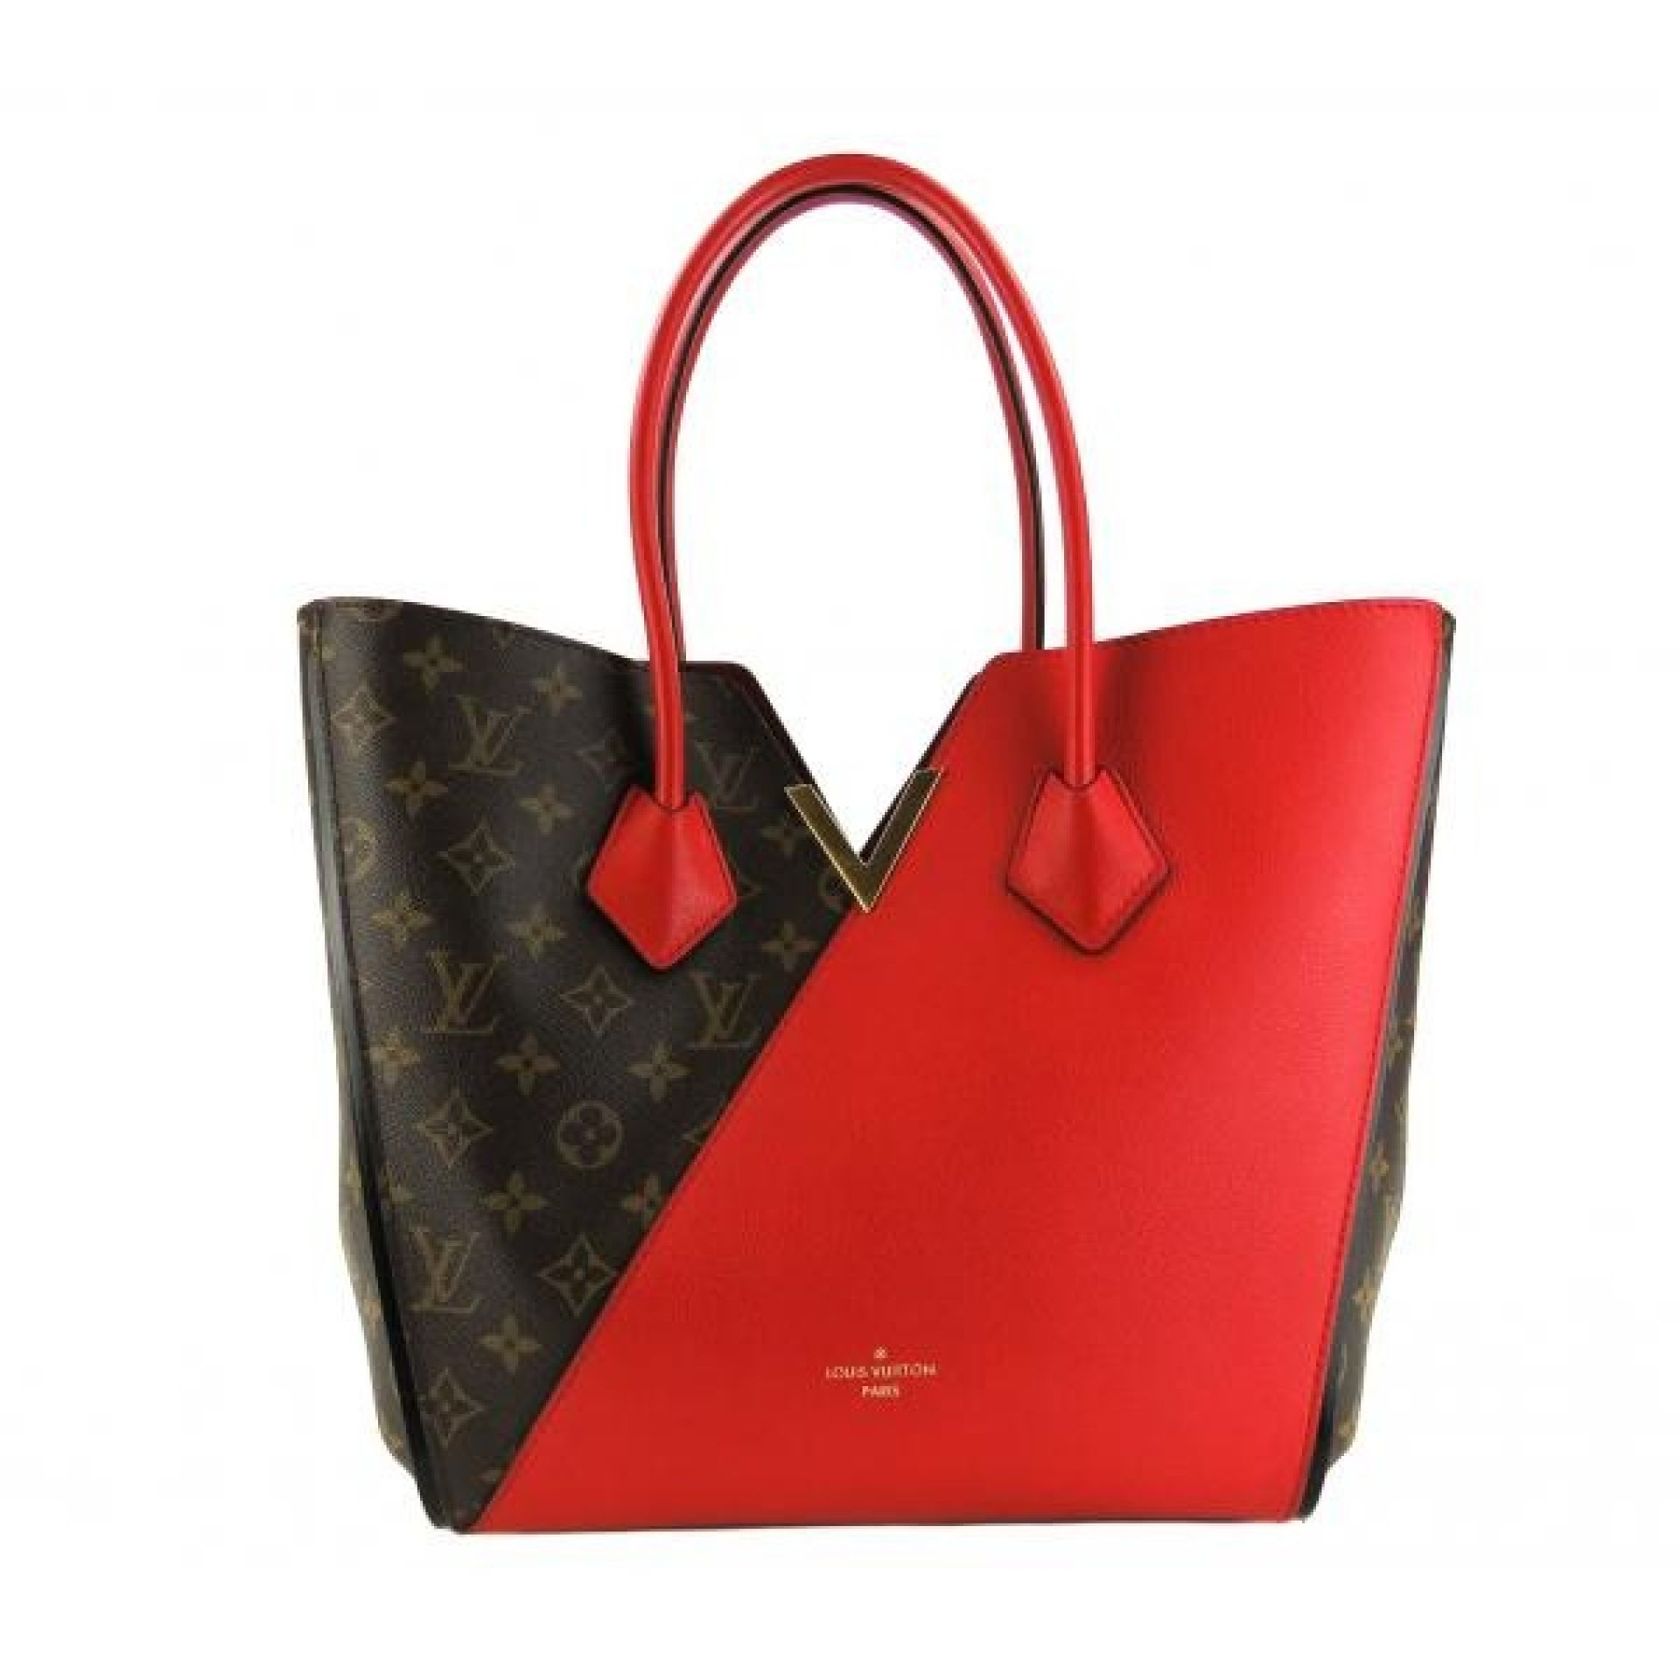 Louis Vuitton Small With Red Sides | Confederated Tribes of the Umatilla Indian Reservation